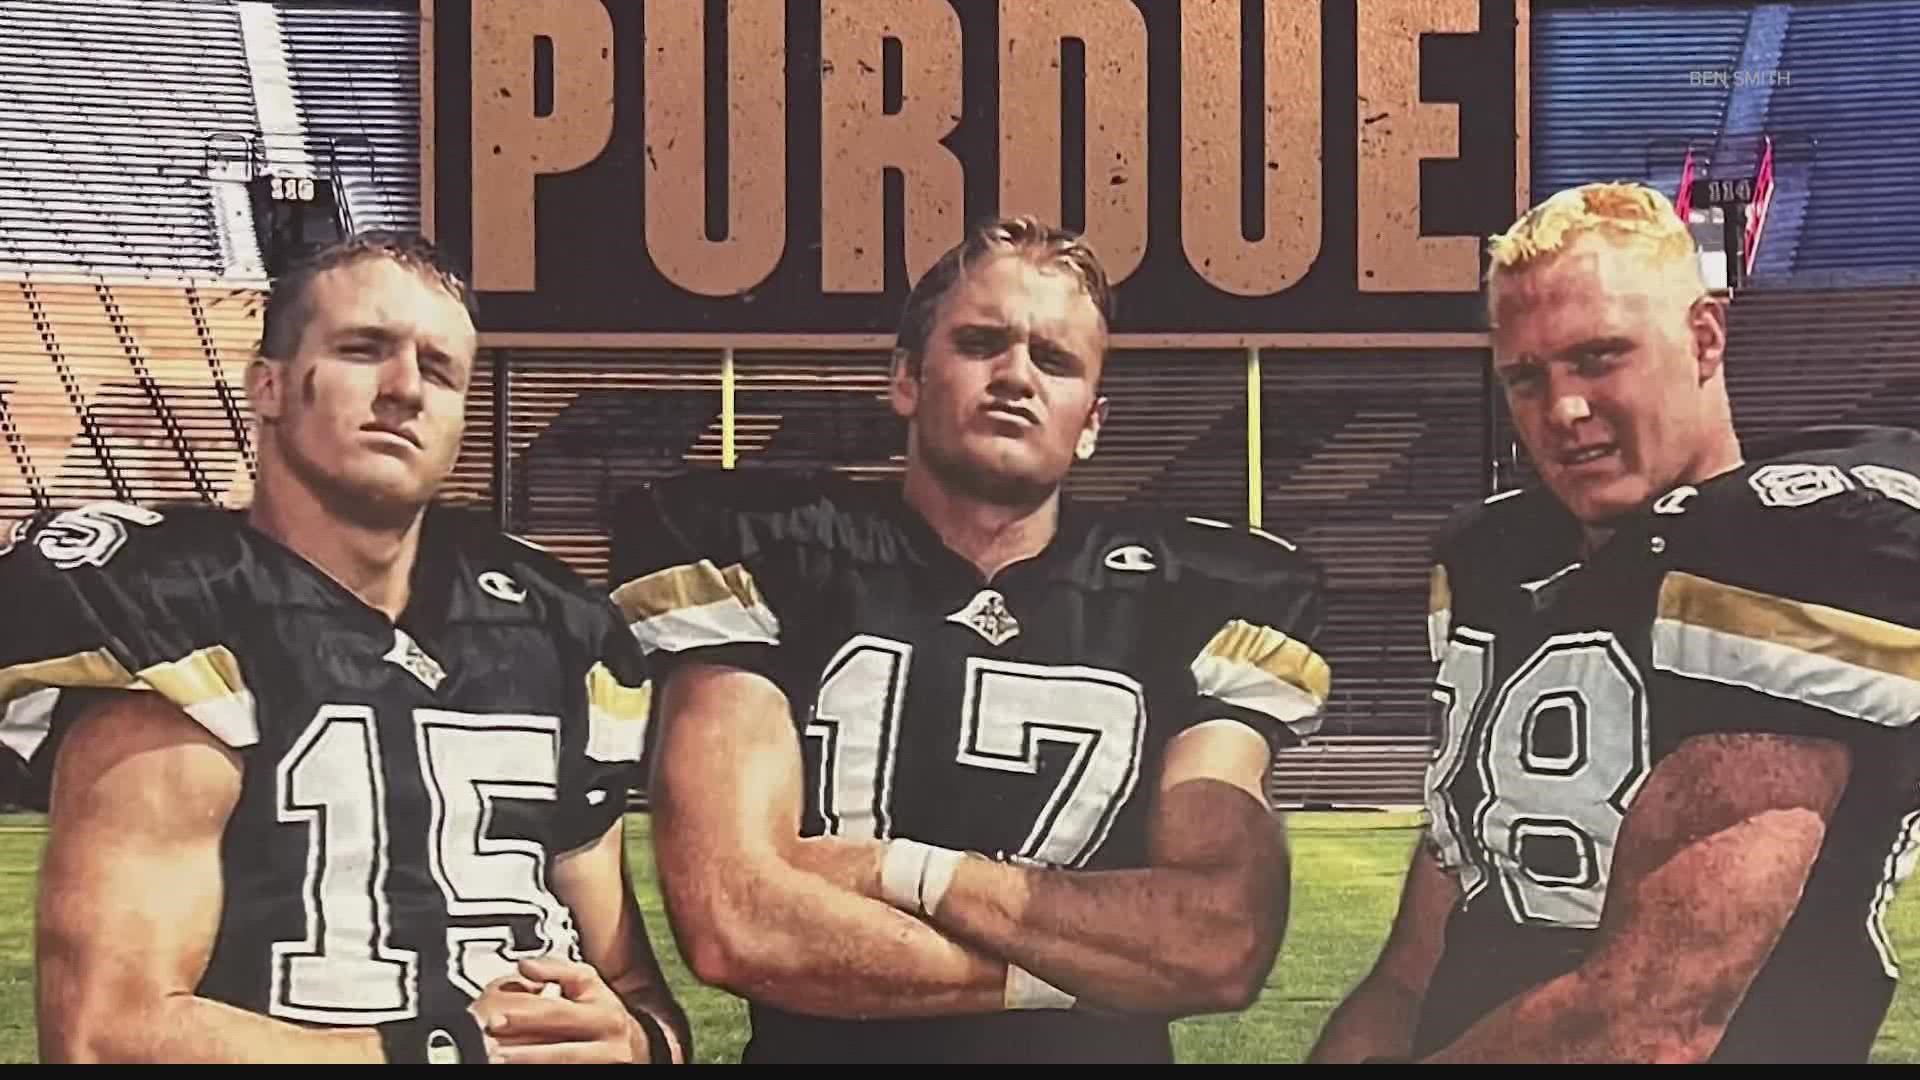 The trio of Boilermakers are back in business!